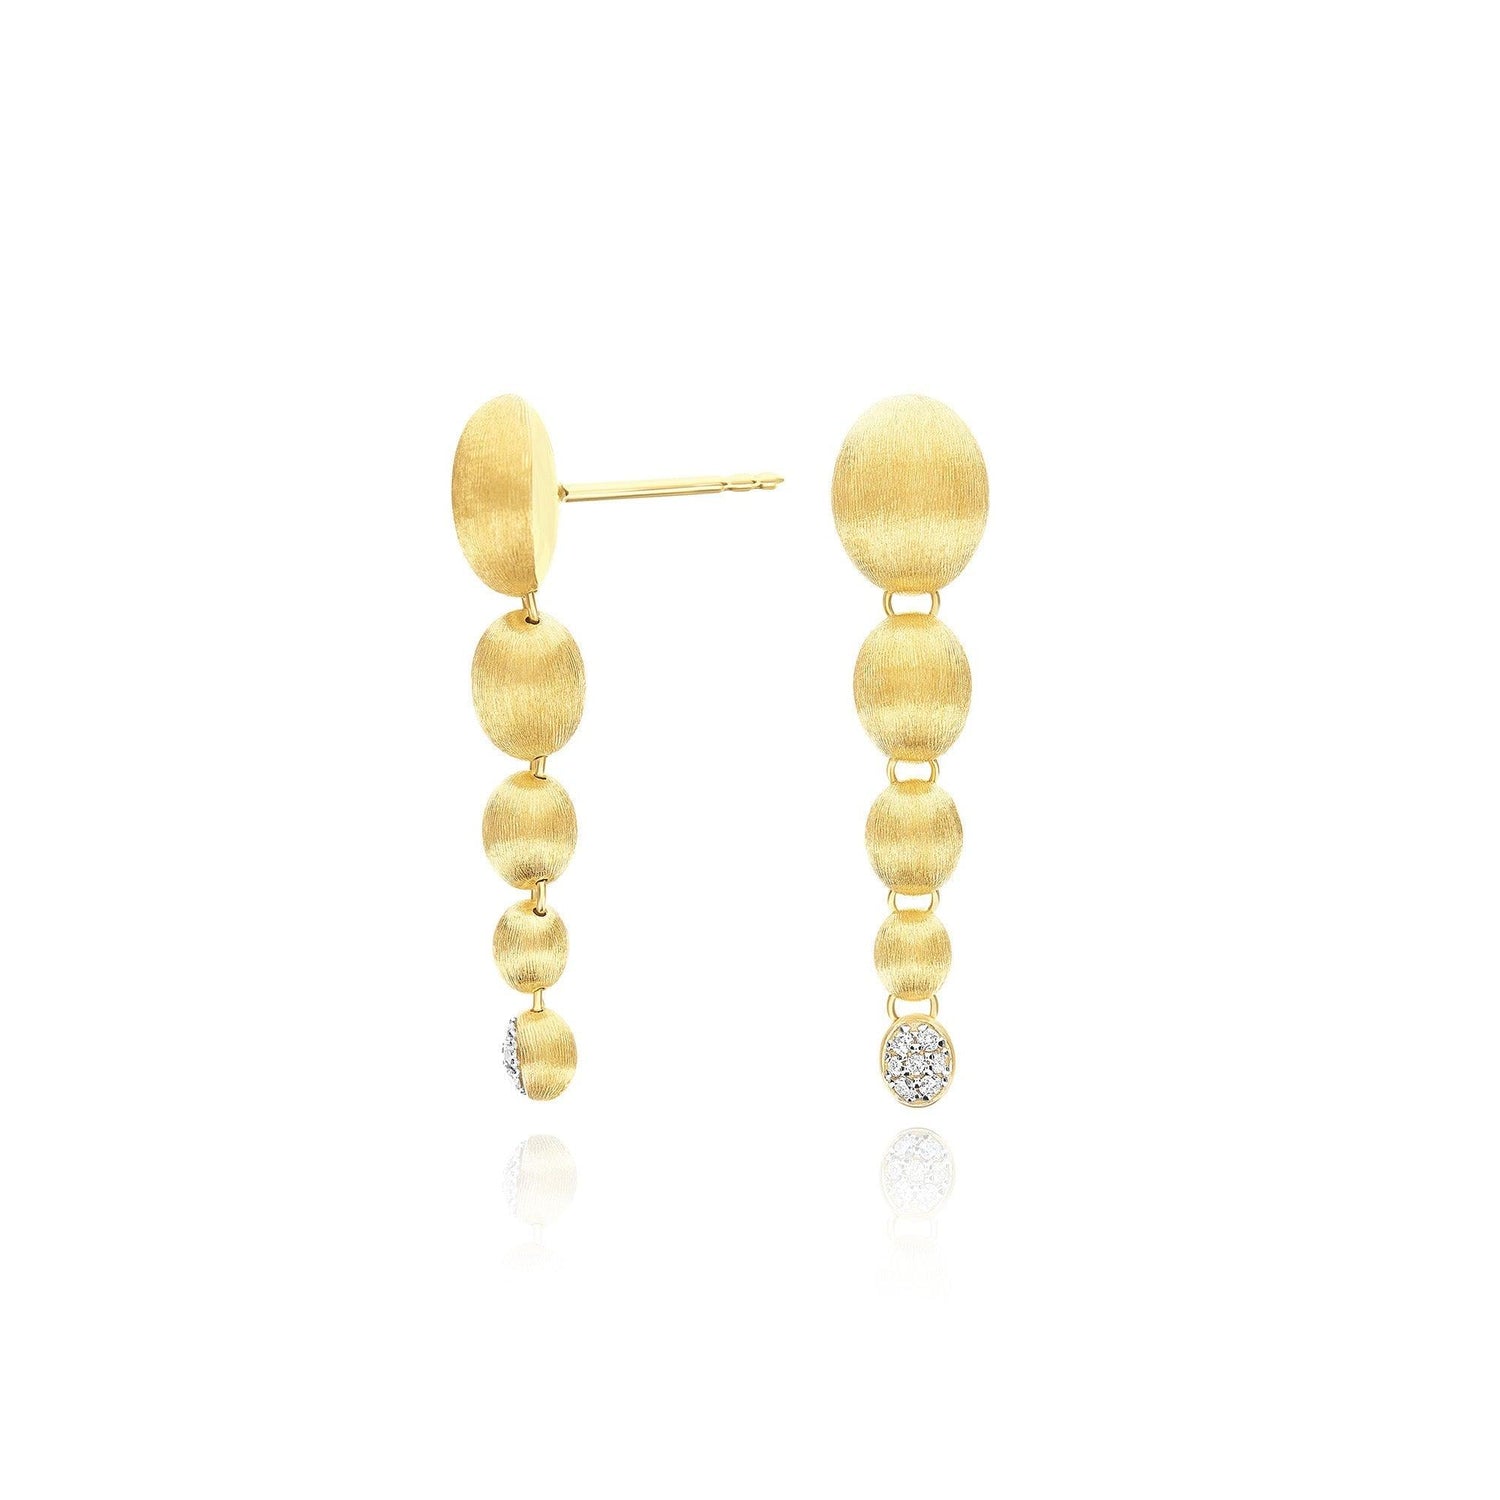 DANCING "NUVOLETTE" GOLD AND DIAMONDS CHARMING DROP EARRINGS